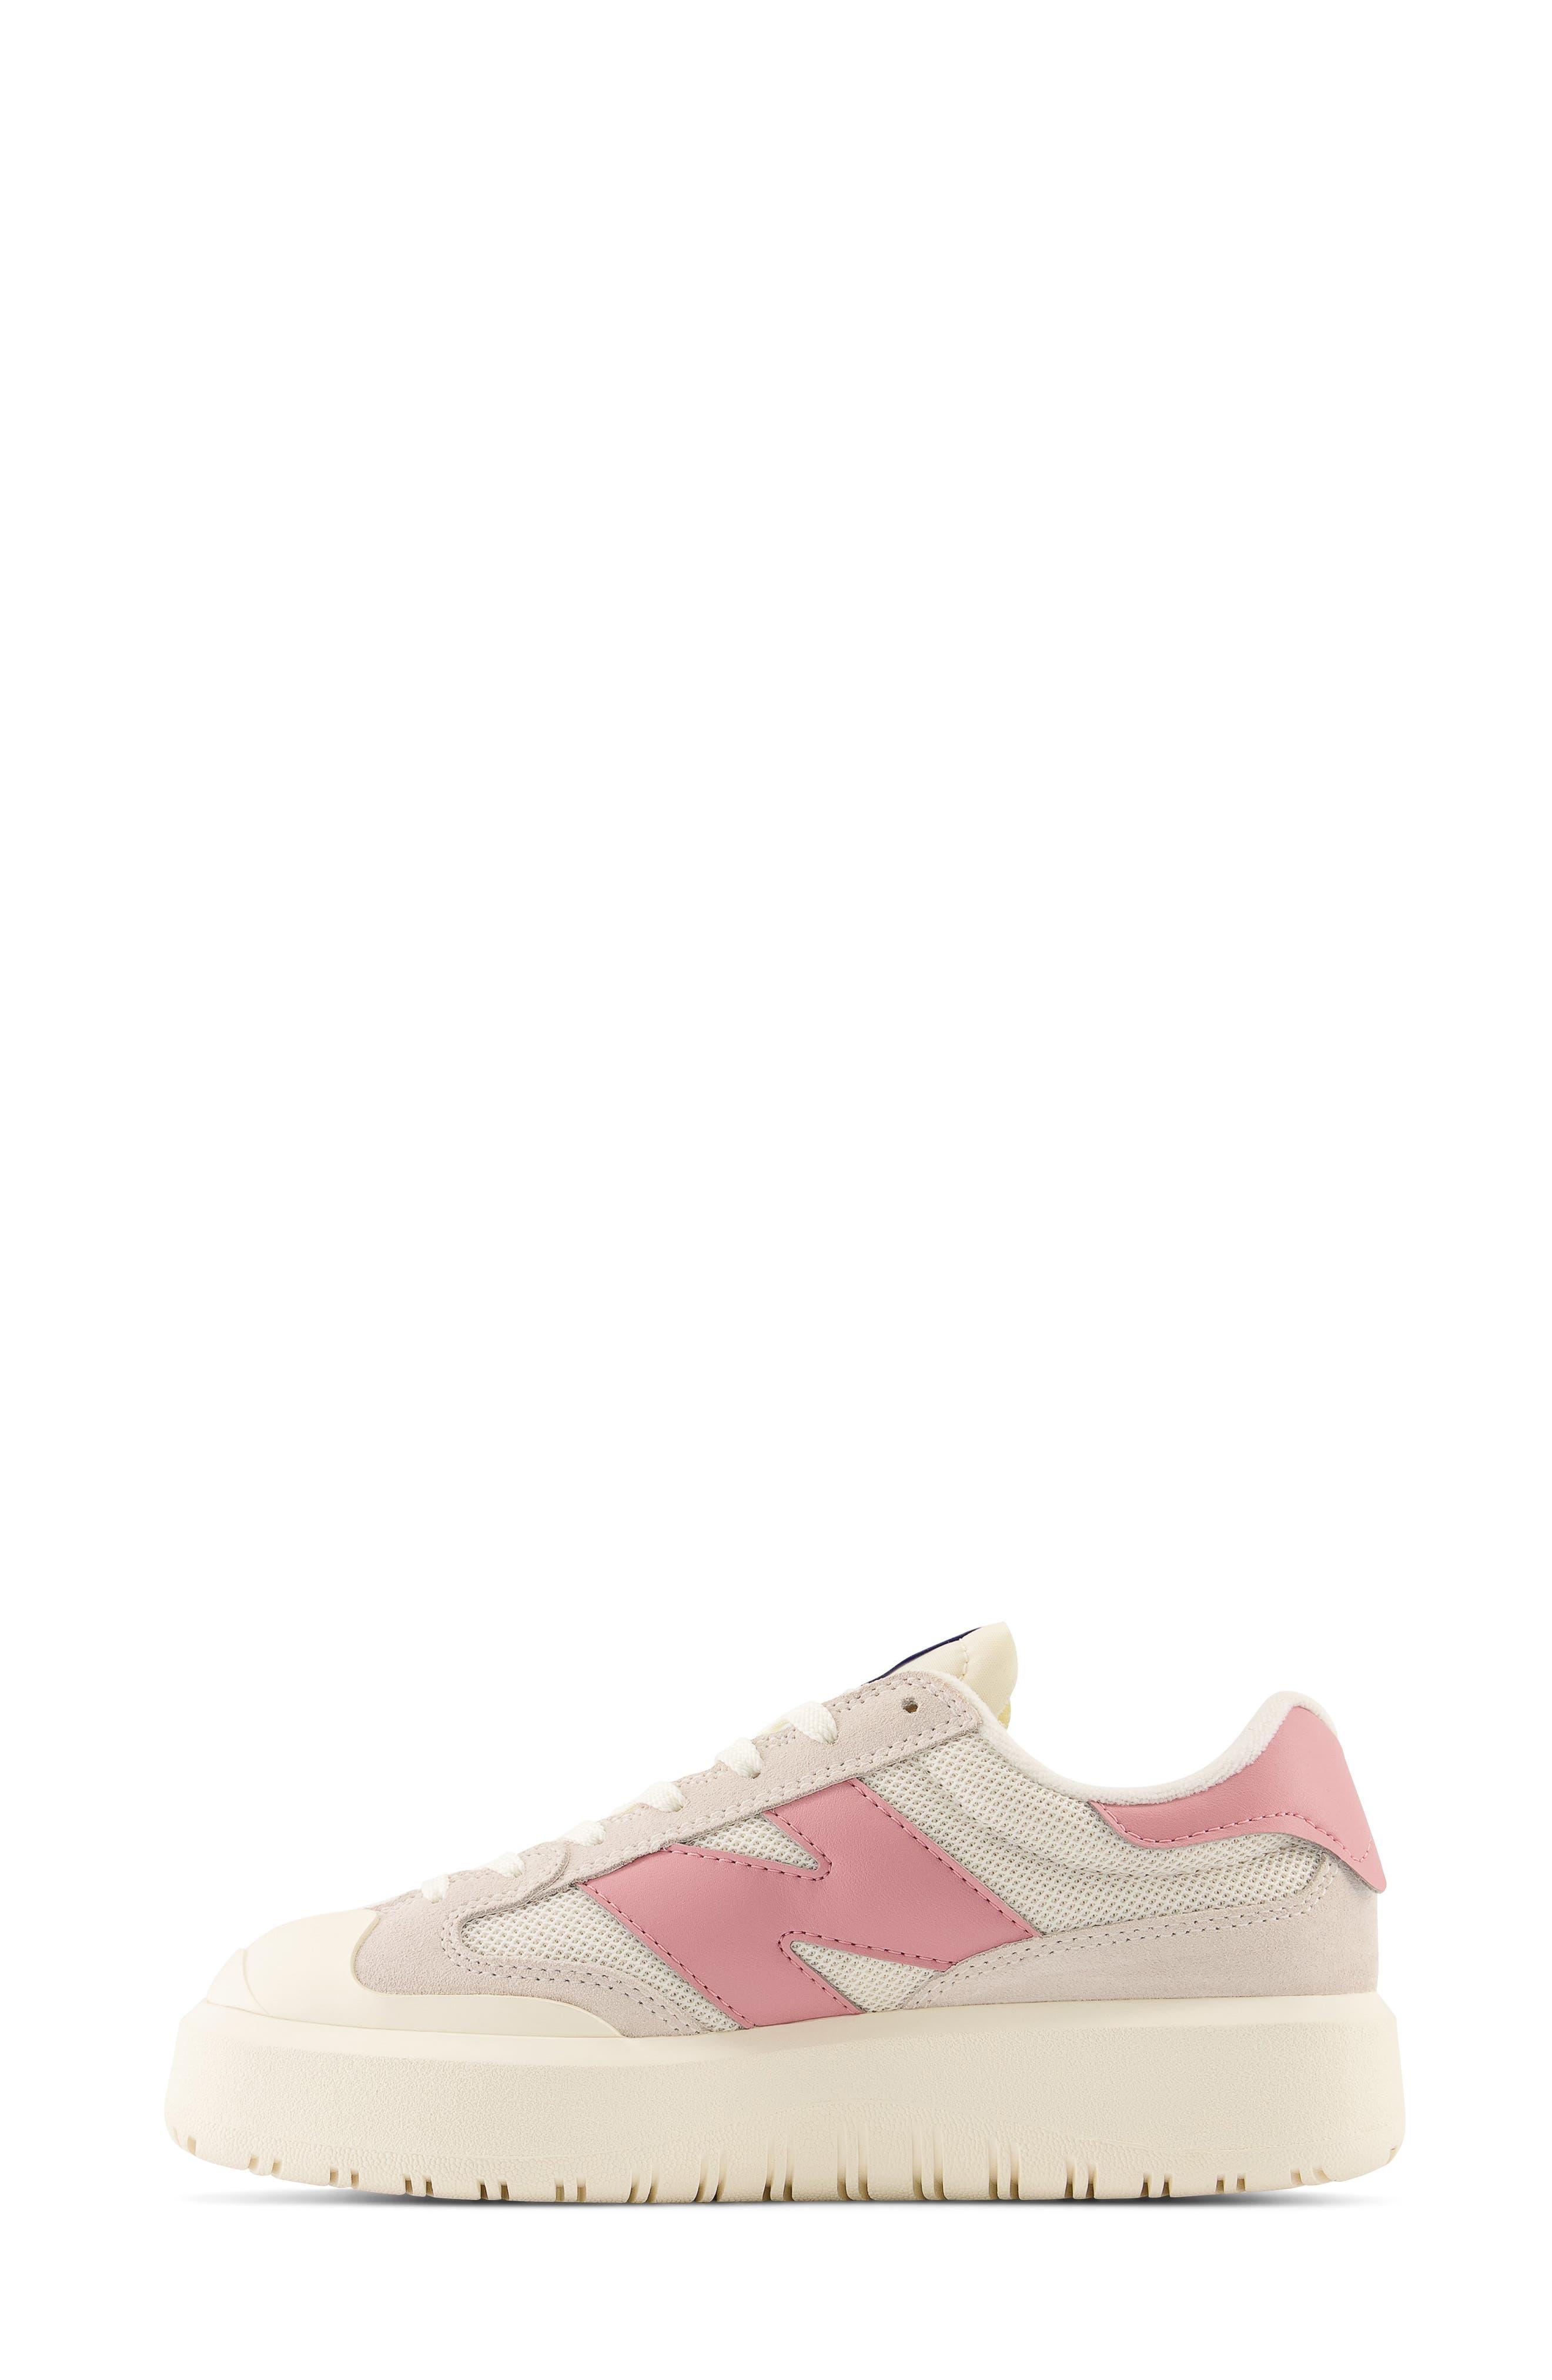 New Balance Ct302 Tennis Sneaker in Pink | Lyst